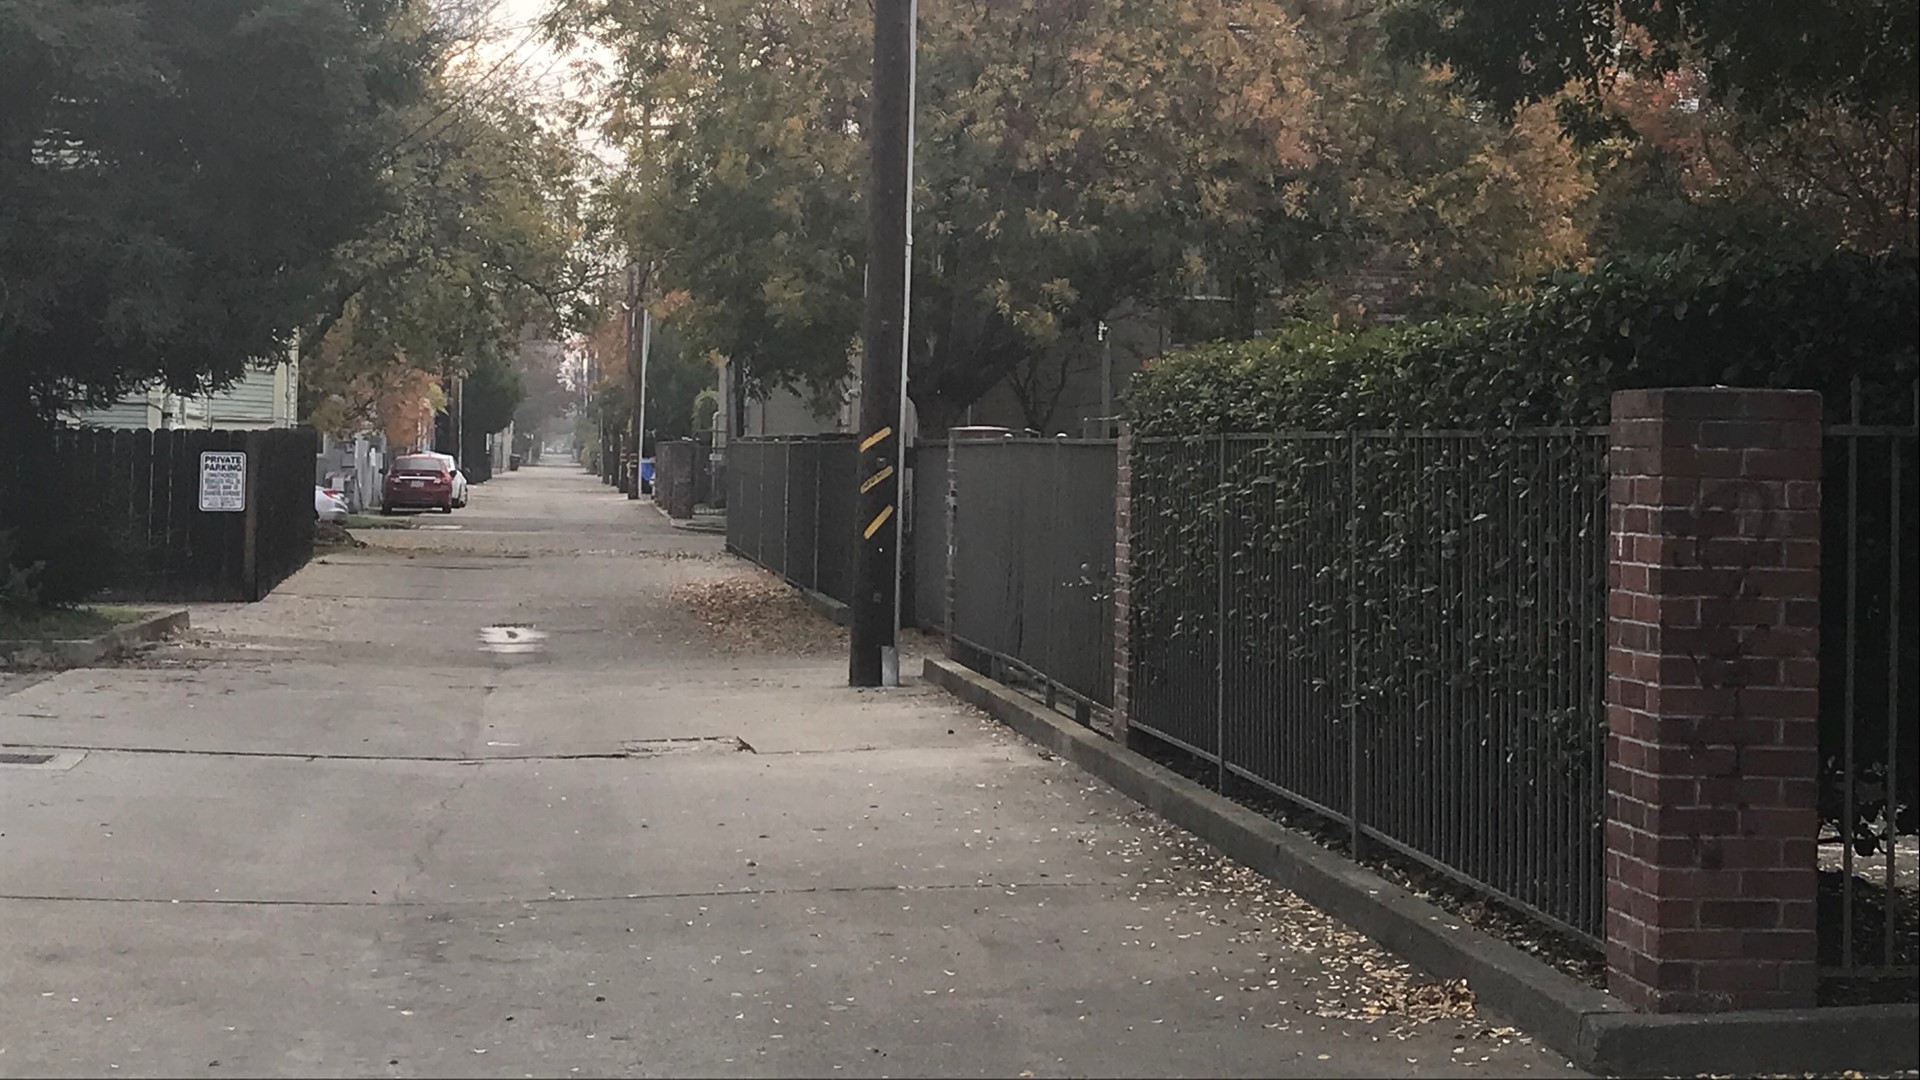 Two cousins reported to Sacramento police they heard screaming as they walked down Fat Alley seeing a white van with blue lettering and a Texas license plate.